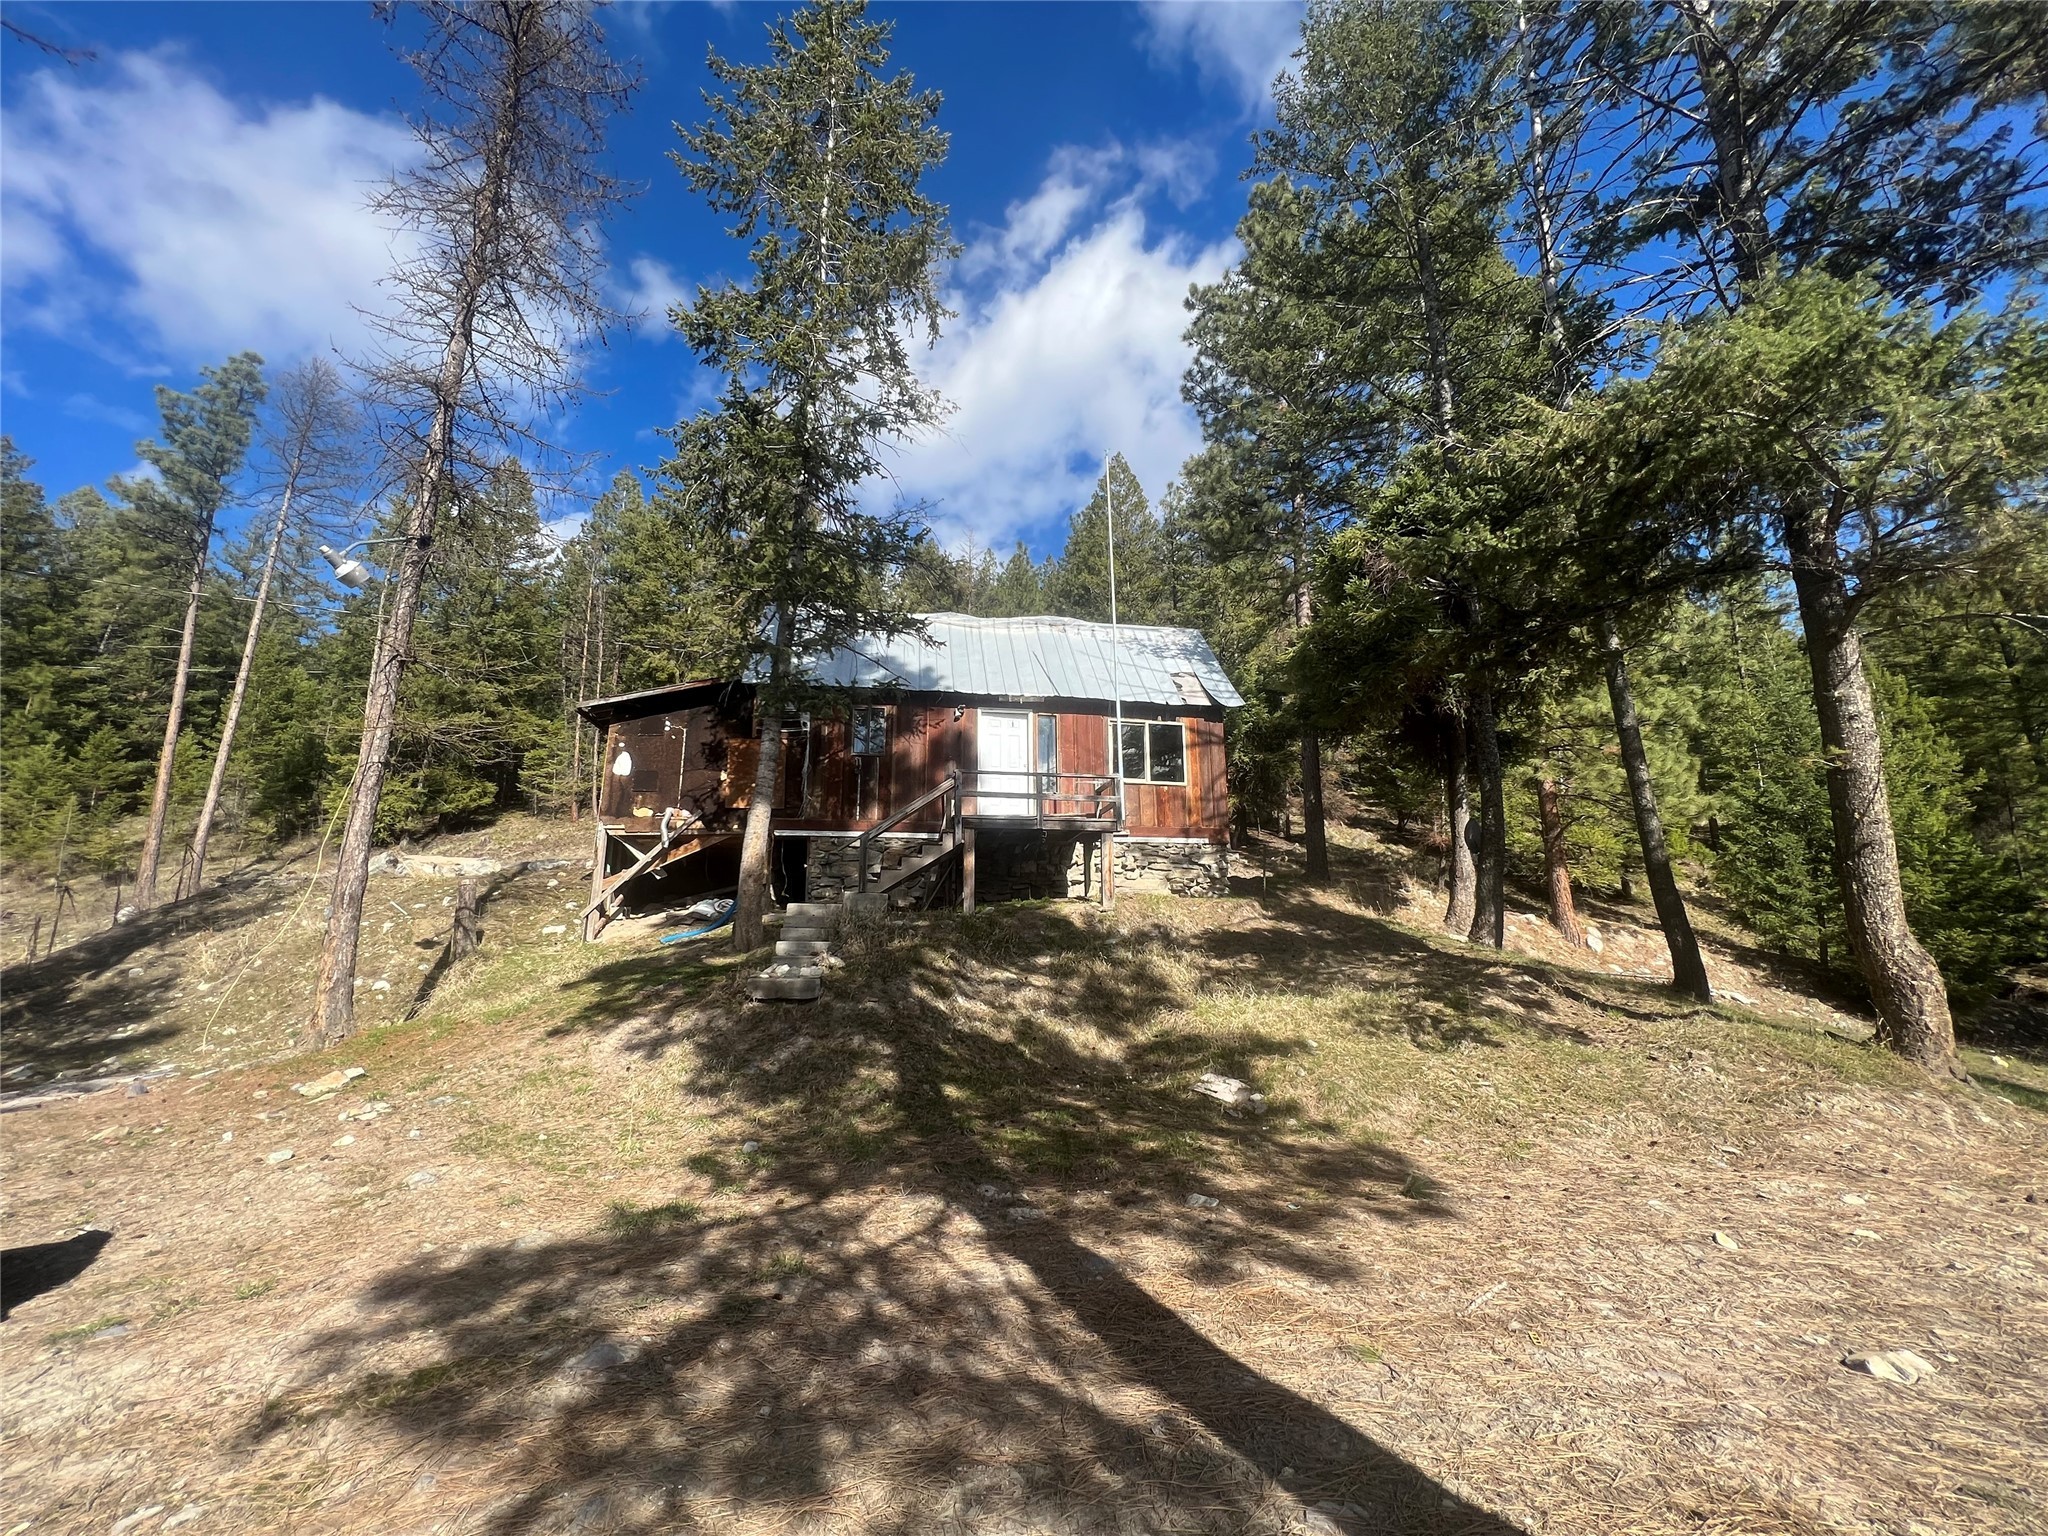 This private secluded property of 4.91 acres boasts amazing views of The Smith Valley.  Being bordered mostly by Stoltz Land your privacy is abundant!  This property has its own well septic is on the property as well as electric.  Great opportunity at a great price for you to own almost 5 acres in beautiful Montana!  This home could use work or could be torn down and start your future with a clean slate!  The views from this property are amazing and with a little tree work, you'll be astonished! Call Cody Butler @ 406-471-2005 or your real estate professional.